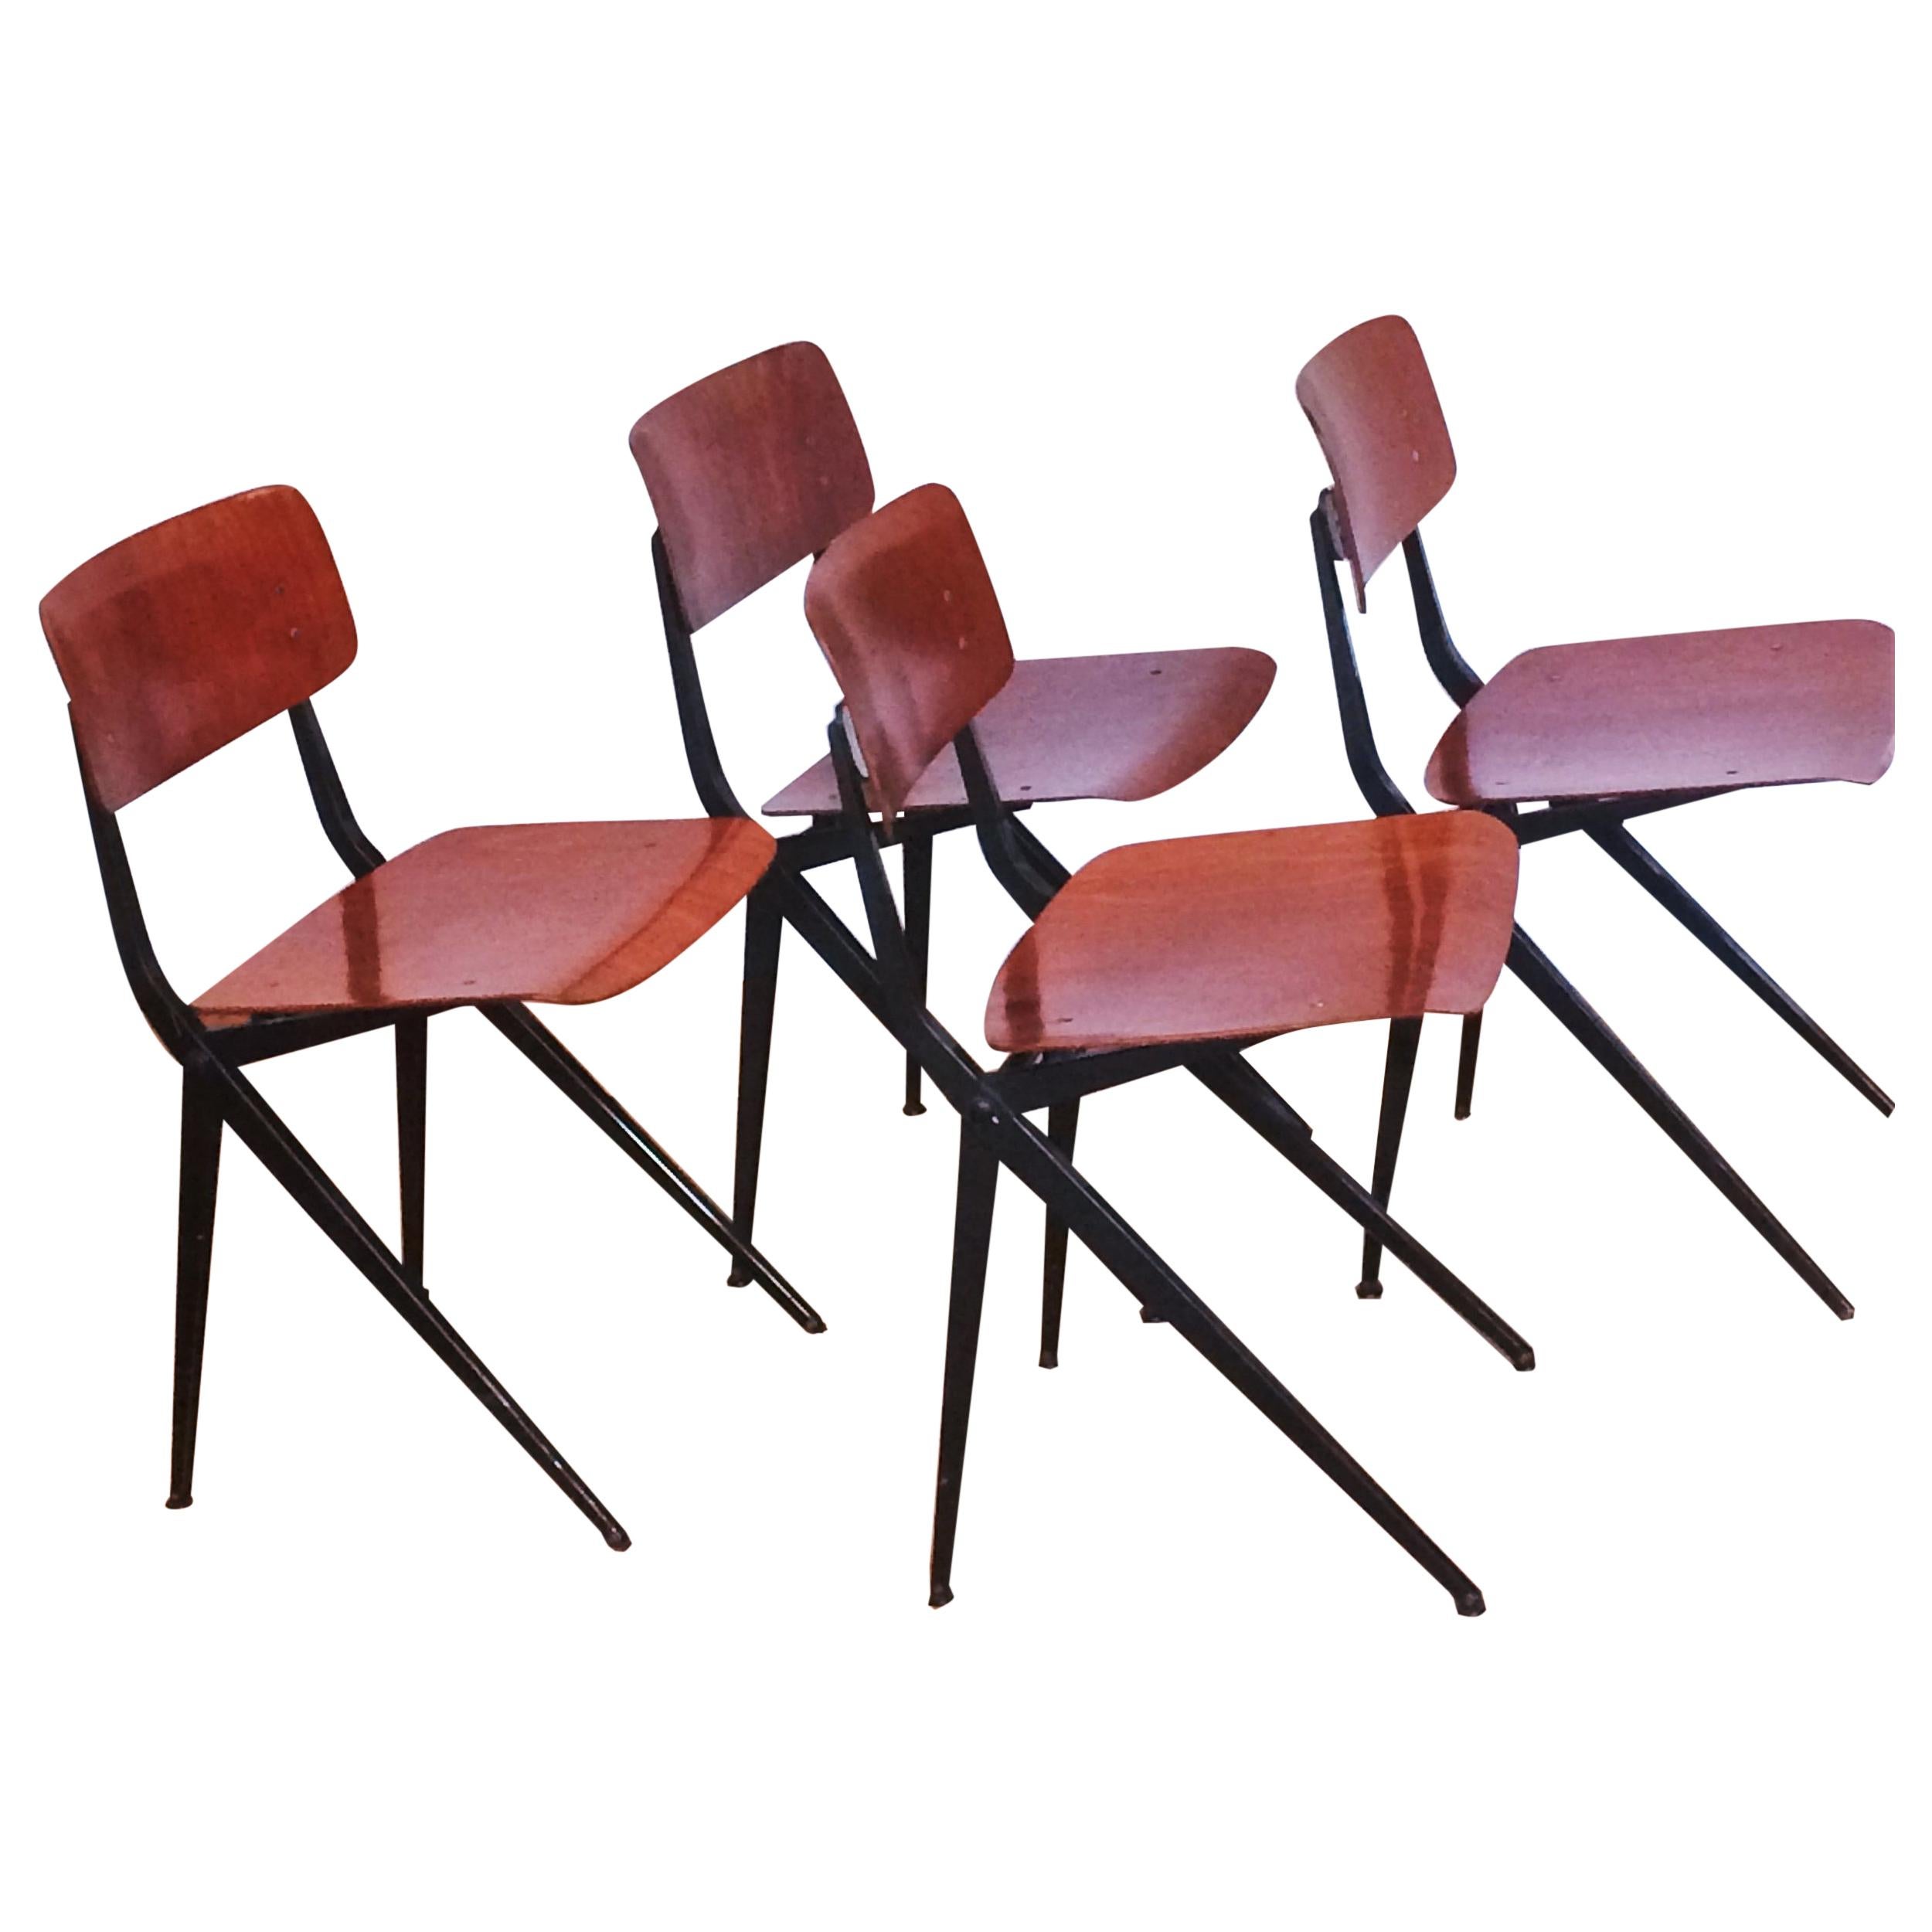 20th Century Industrial Pagwood Chairs by Ynske Kooistra for Marko, Set of 4